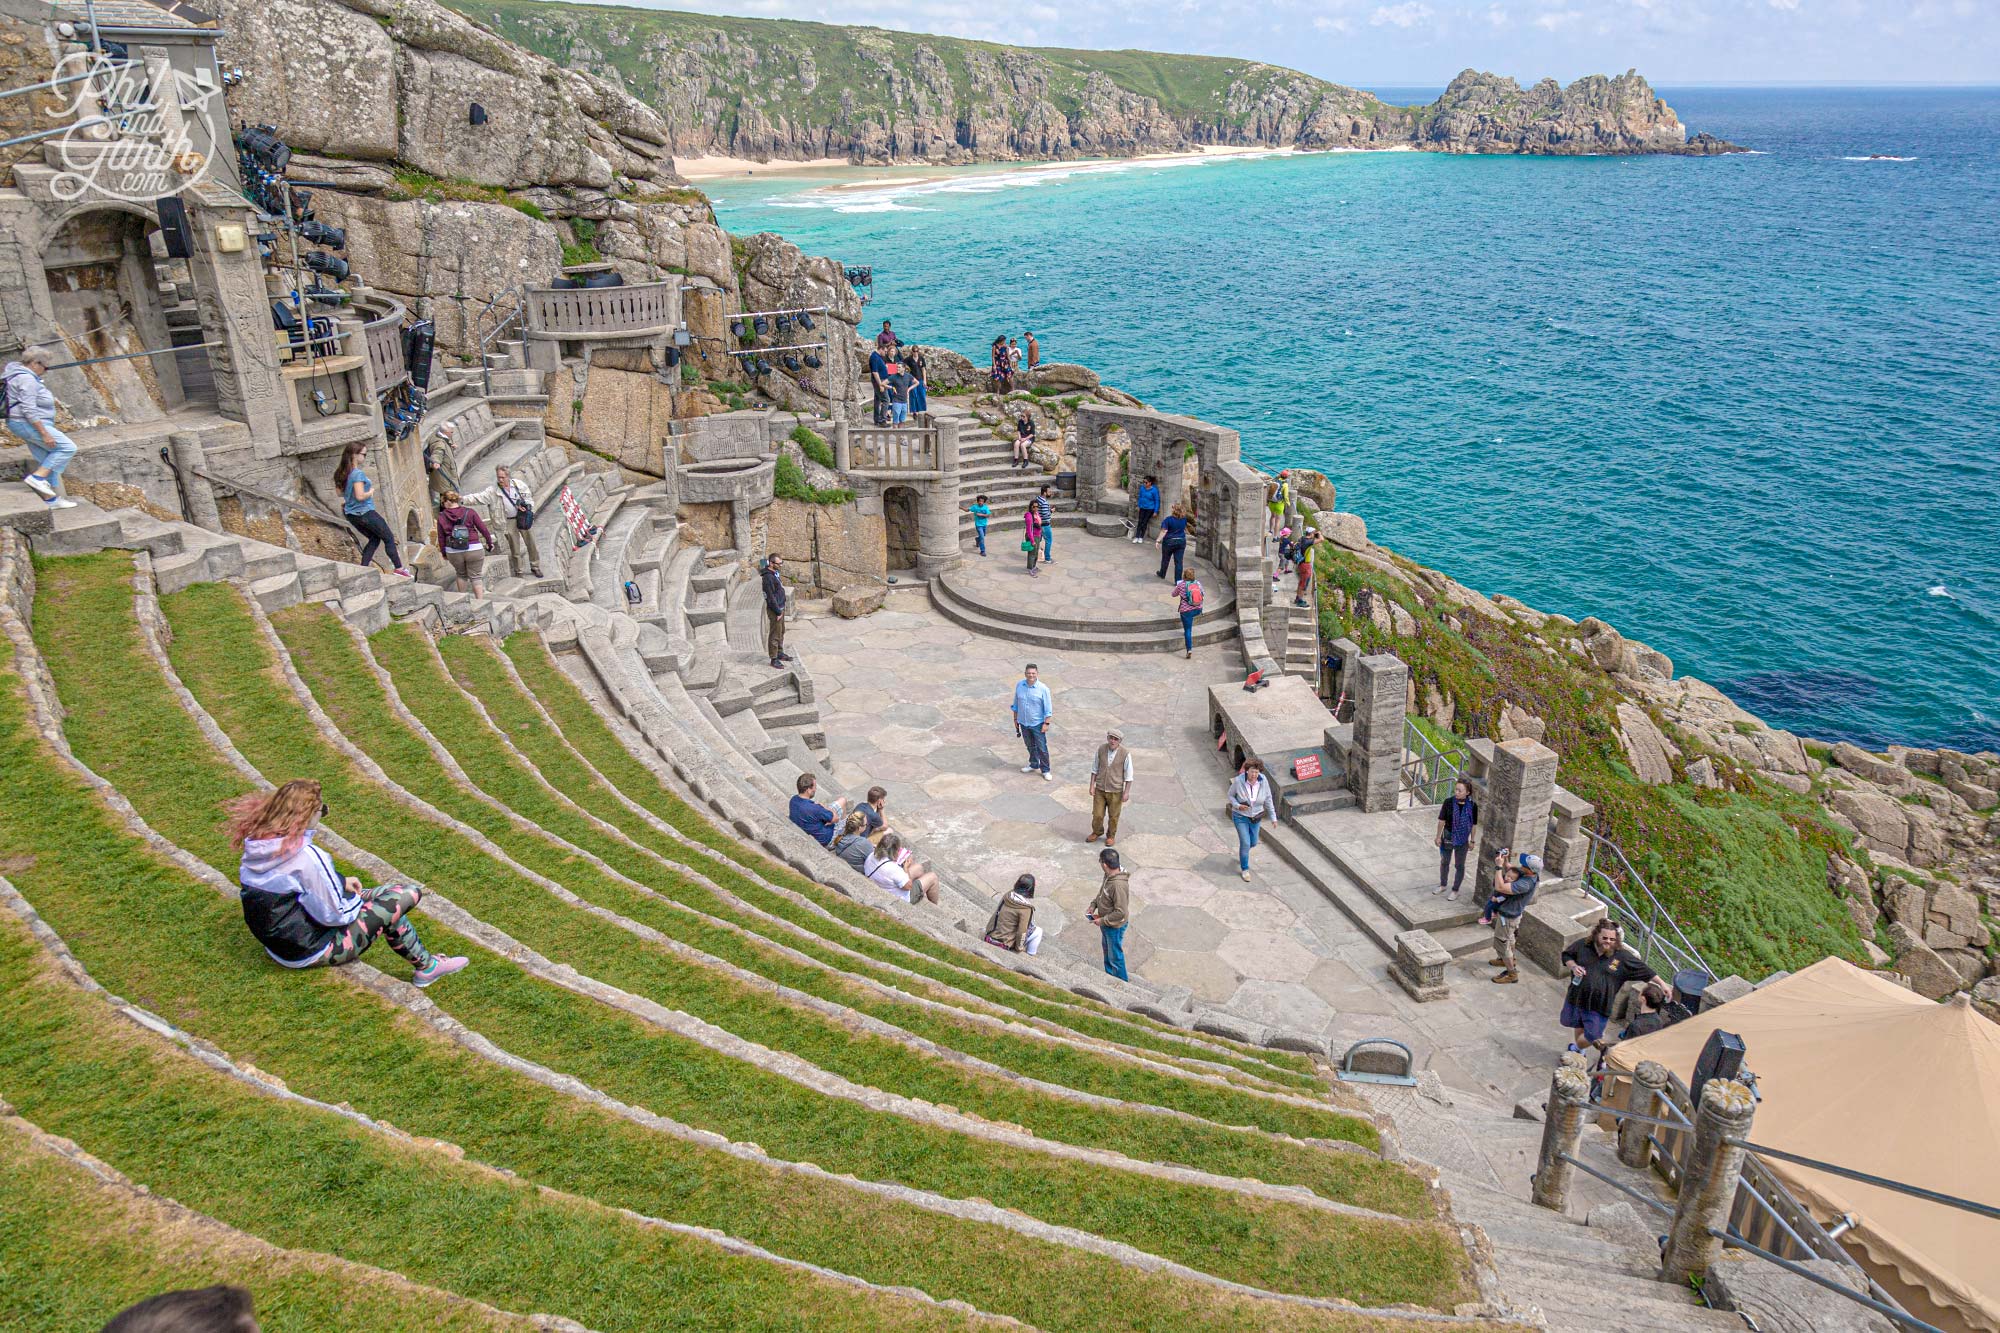 The Minack Theatre - possibly the most spectacular theatre setting in the world?